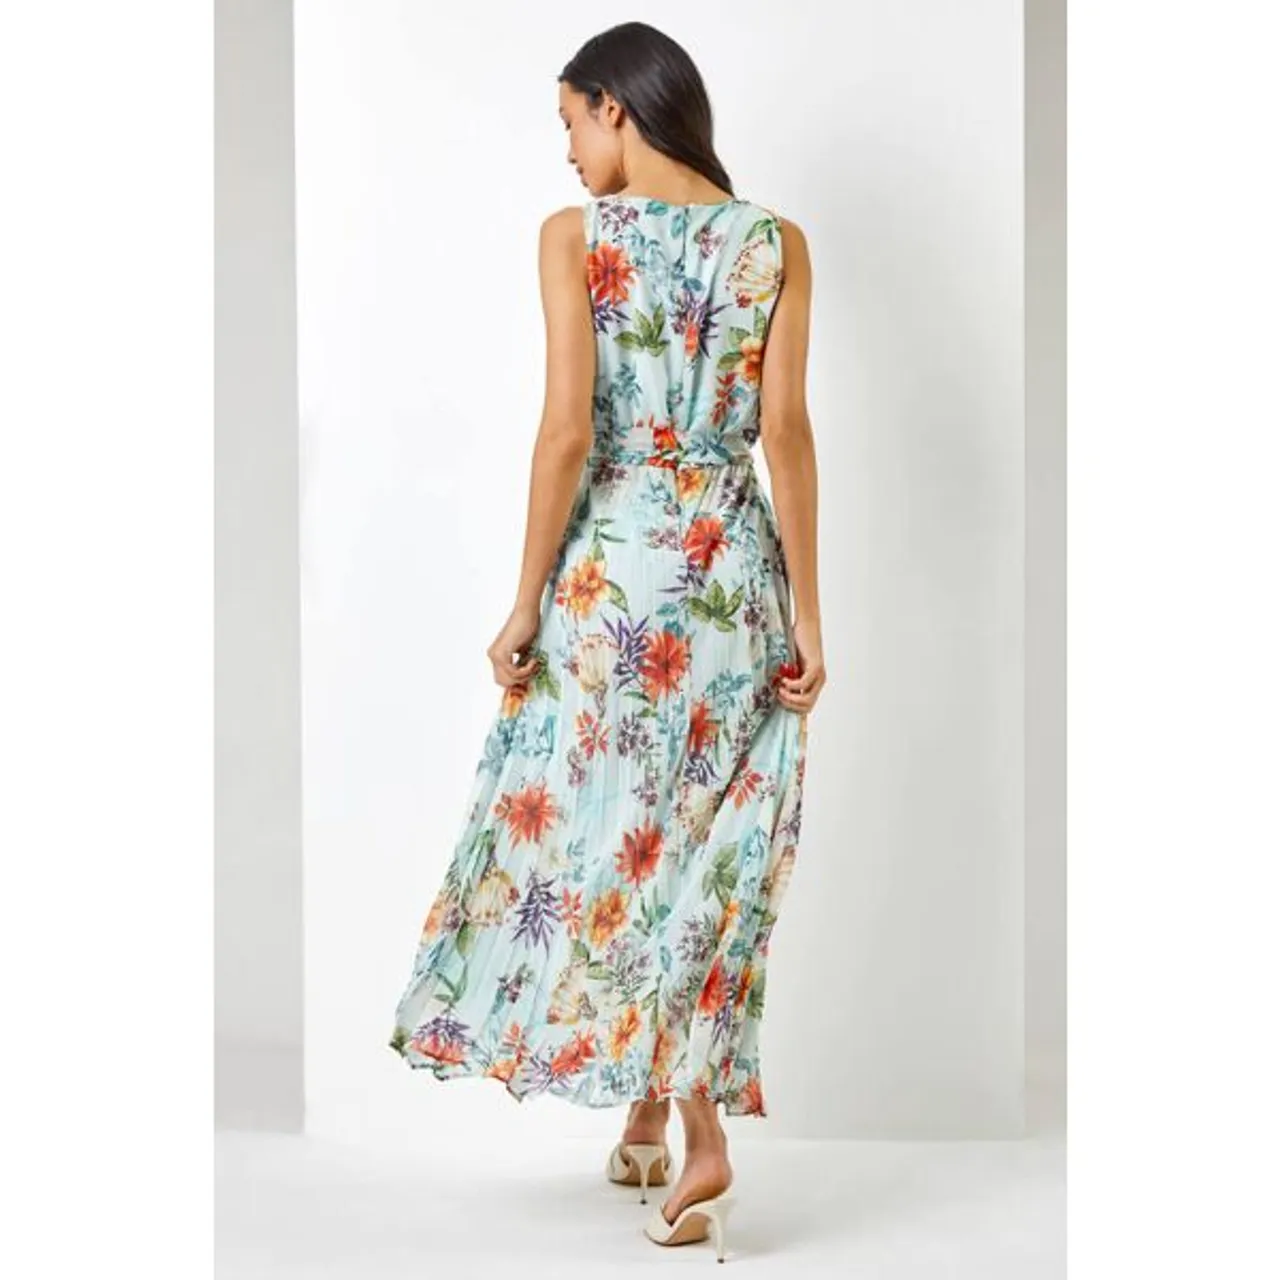 Roman Floral Print Pleated Maxi Dress in Sage - Size 10 10 female